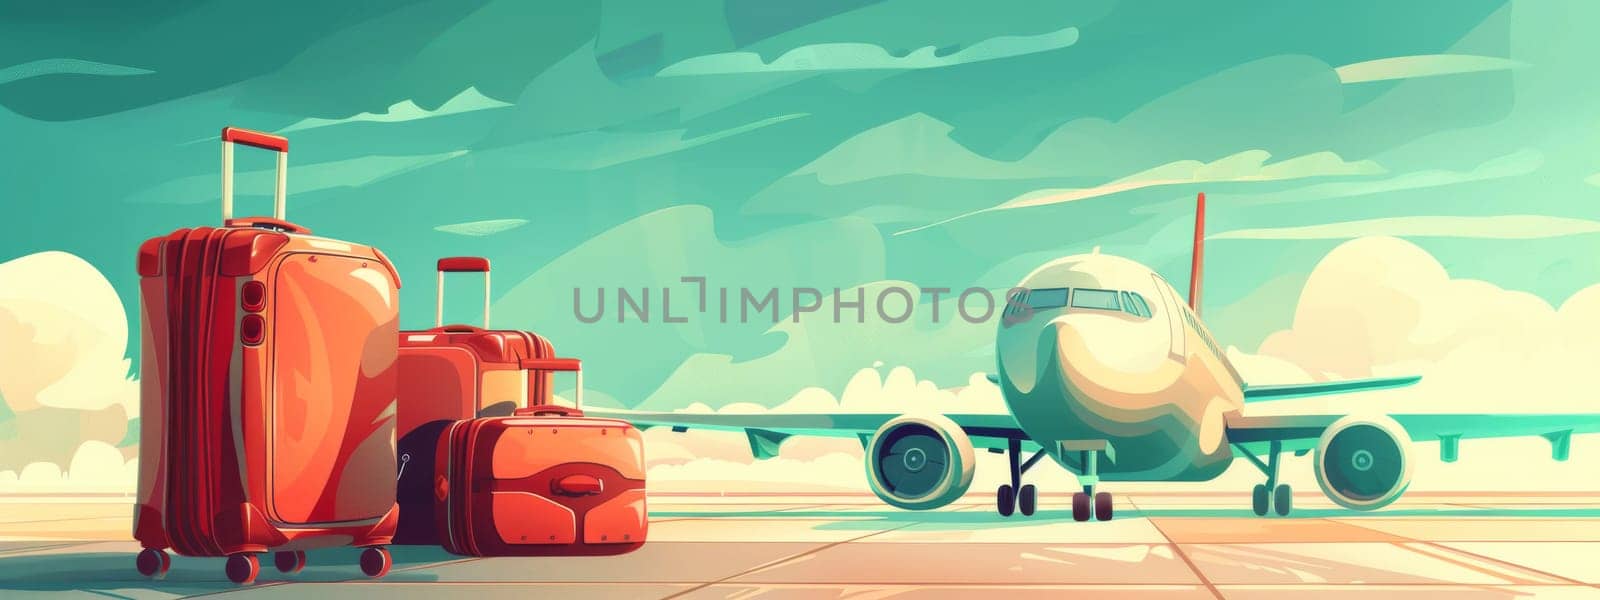 Luggage and an airplane, traveling concept